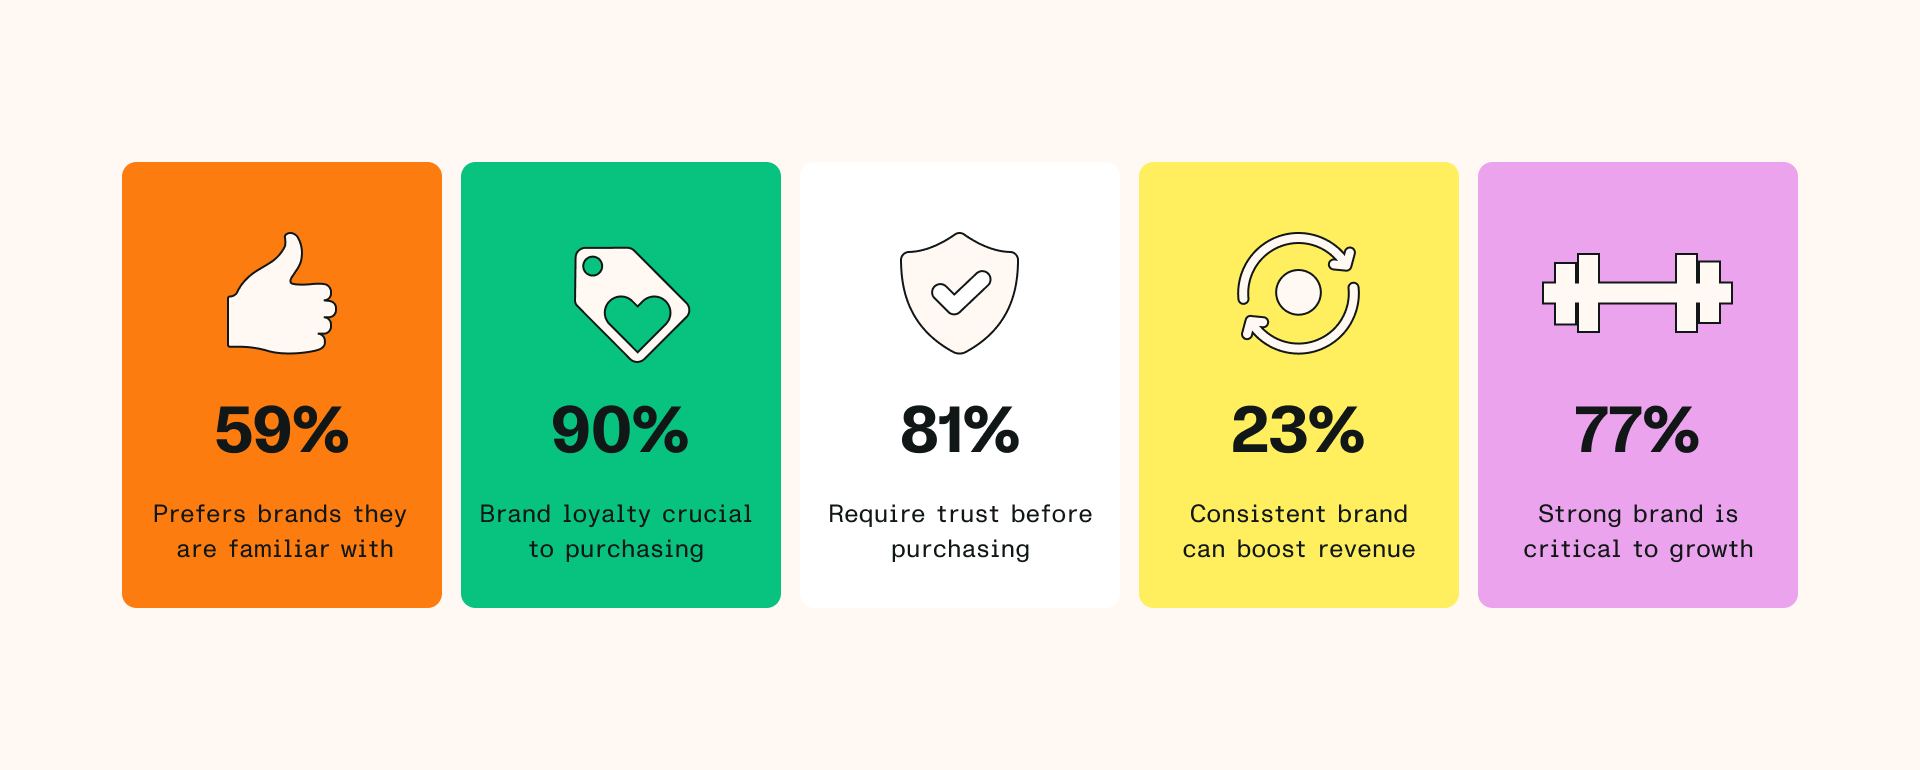  Infographic on brand impact: familiarity, loyalty, trust, consistency, and strength